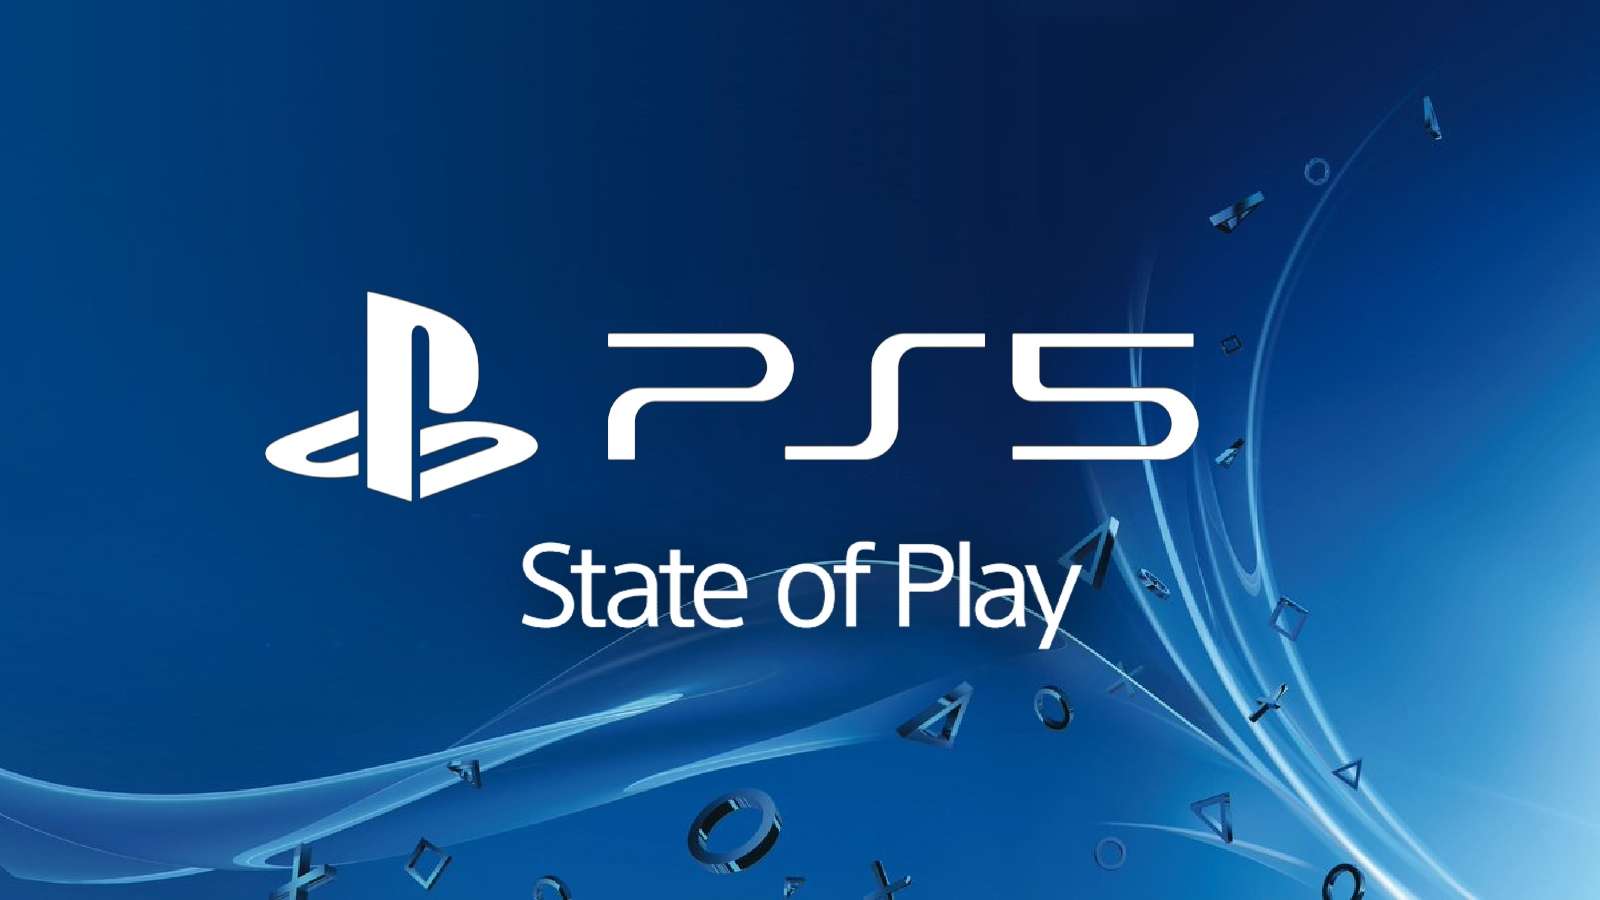 PS5 rumored State of Play event